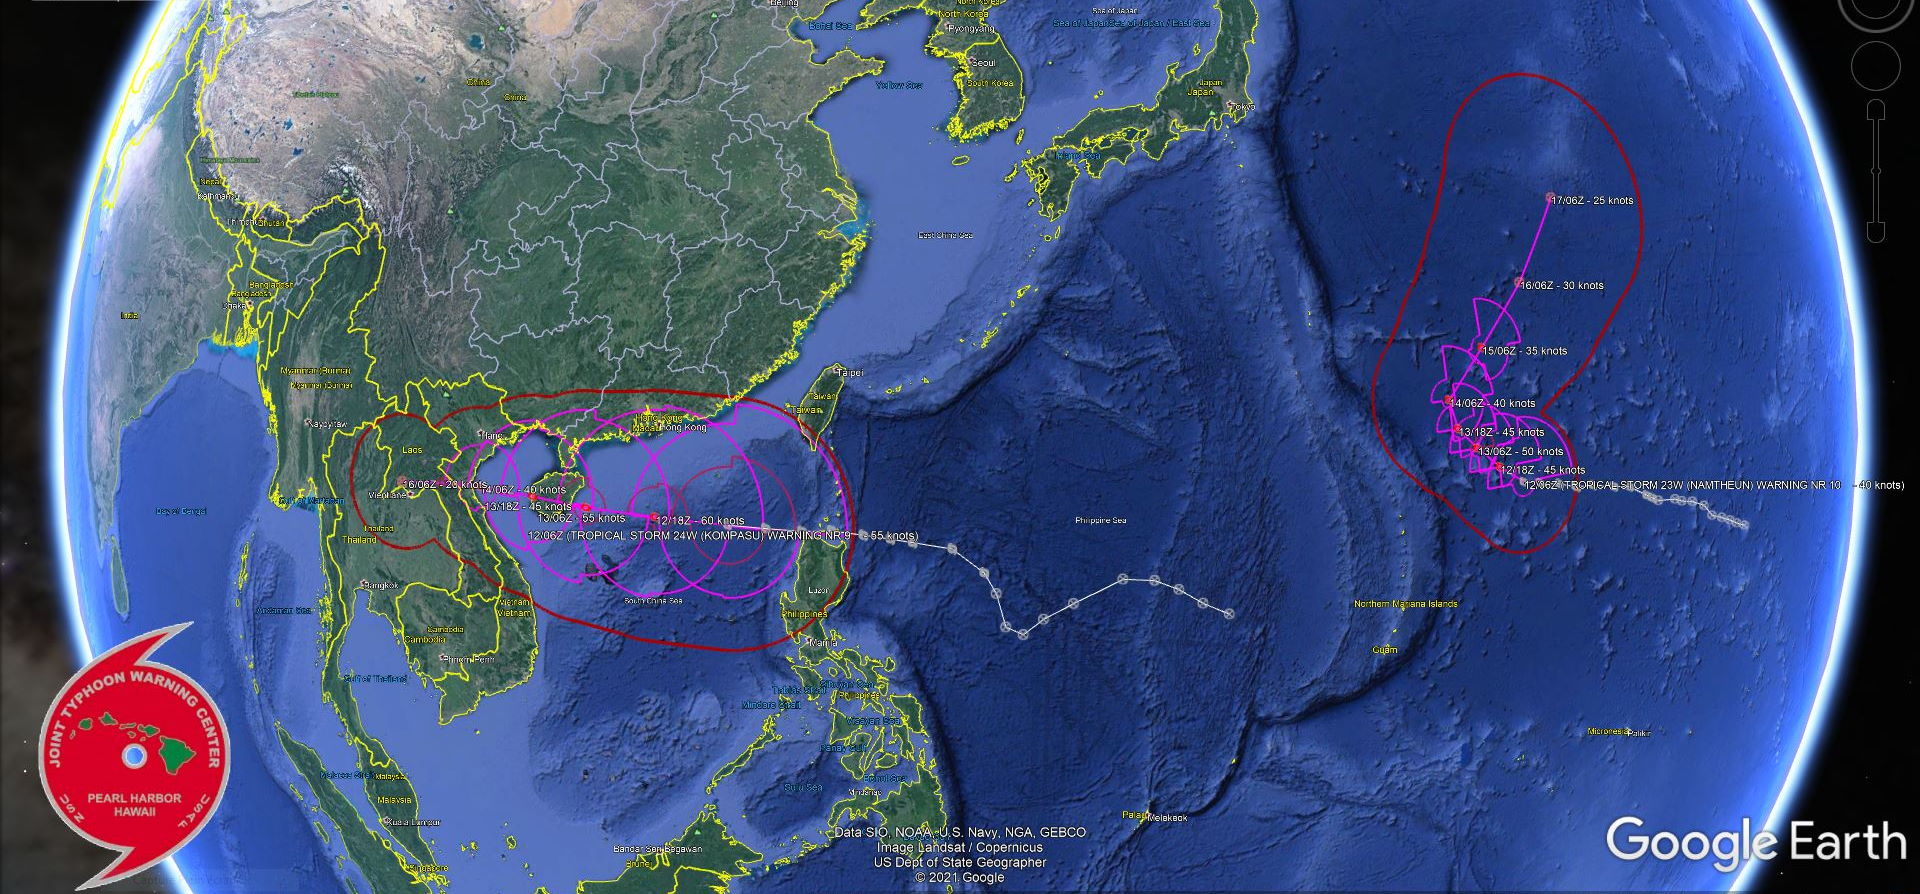 TS 24W(KOMPASU) is a very large system over the South China Sea, 12/09utc update